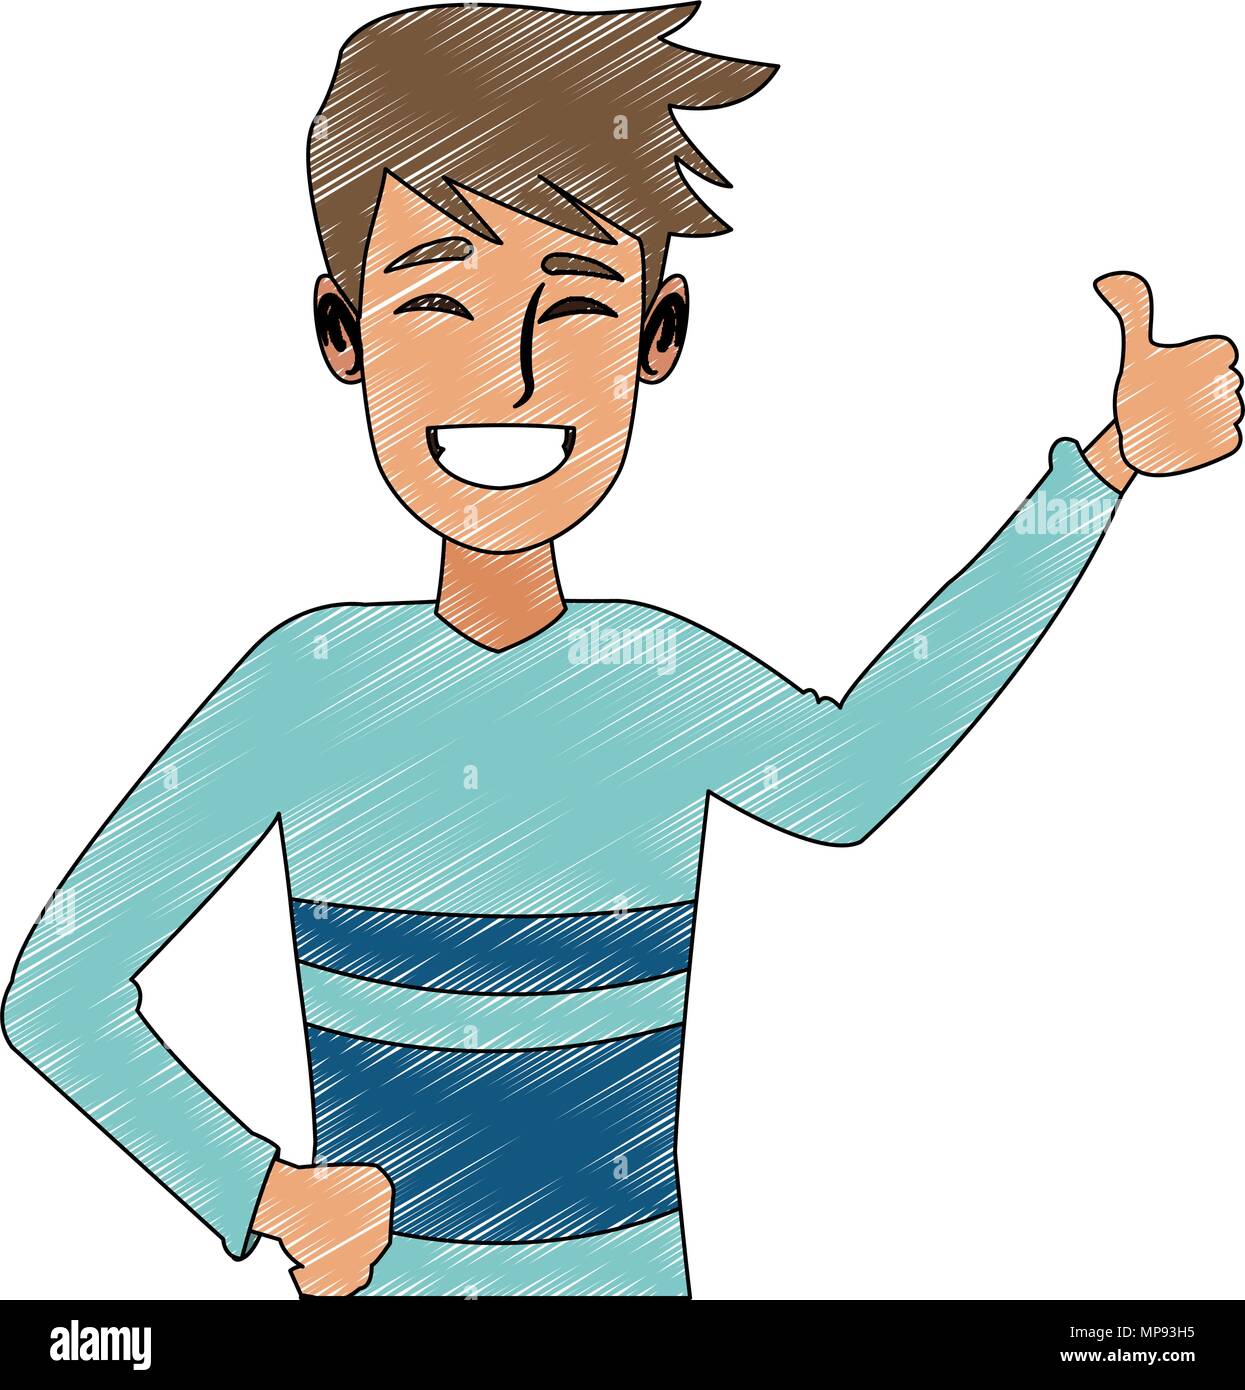 Happy Young Man Cartoon Scribble Stock Vector Image Art Alamy Find the perfect cartoons stock photo. https www alamy com happy young man cartoon scribble image185826513 html